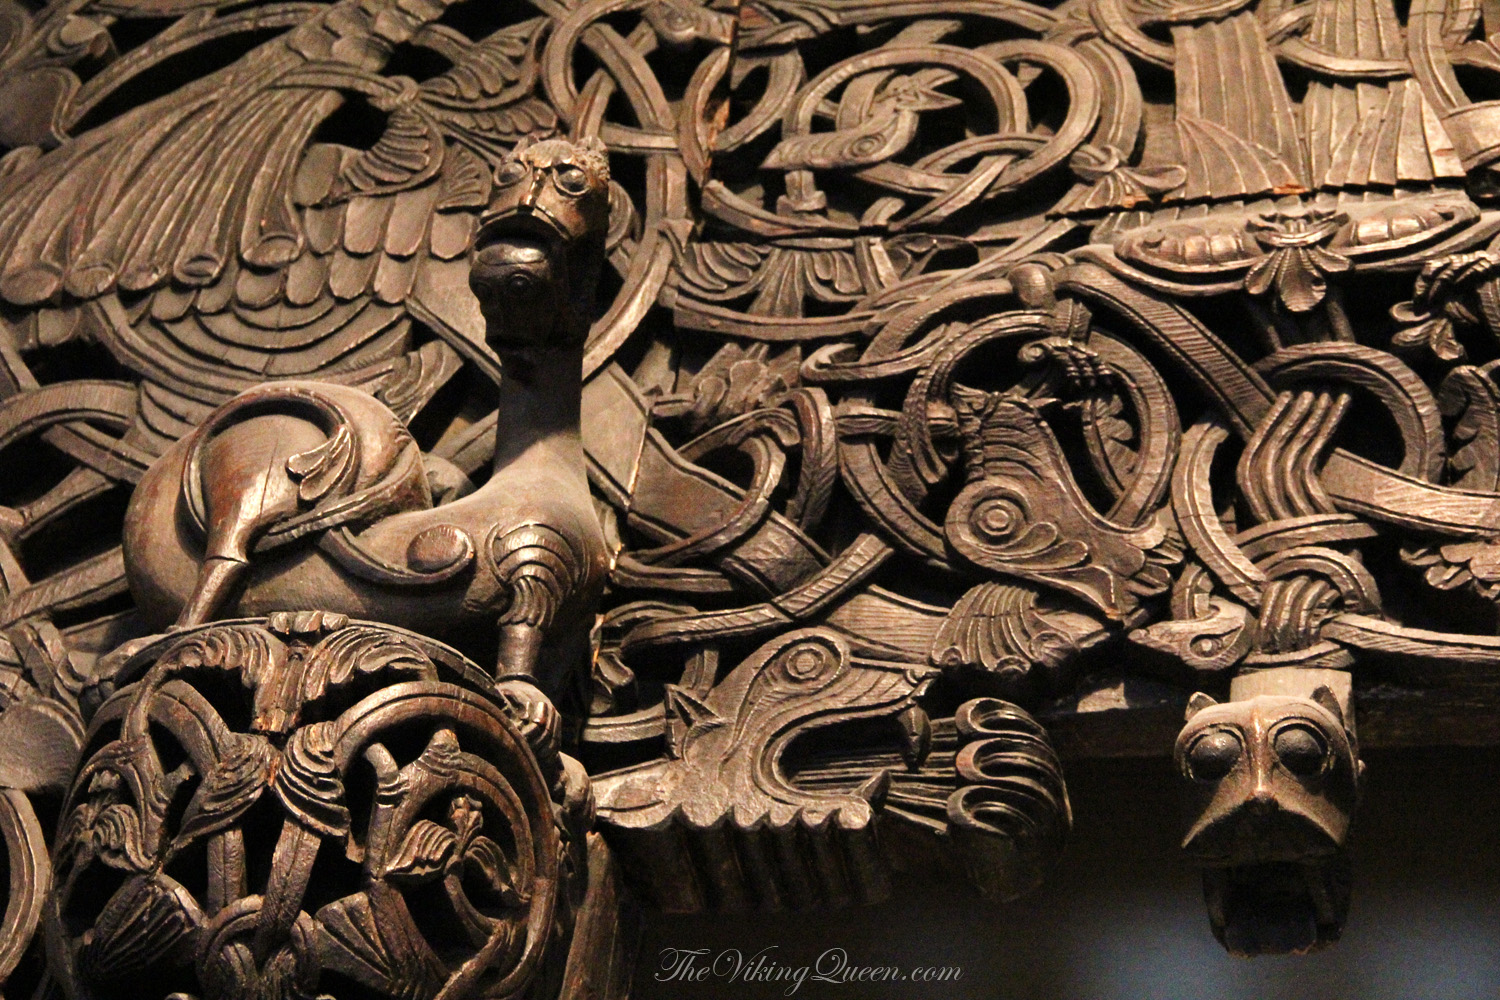 wood carving TheVikingQueen